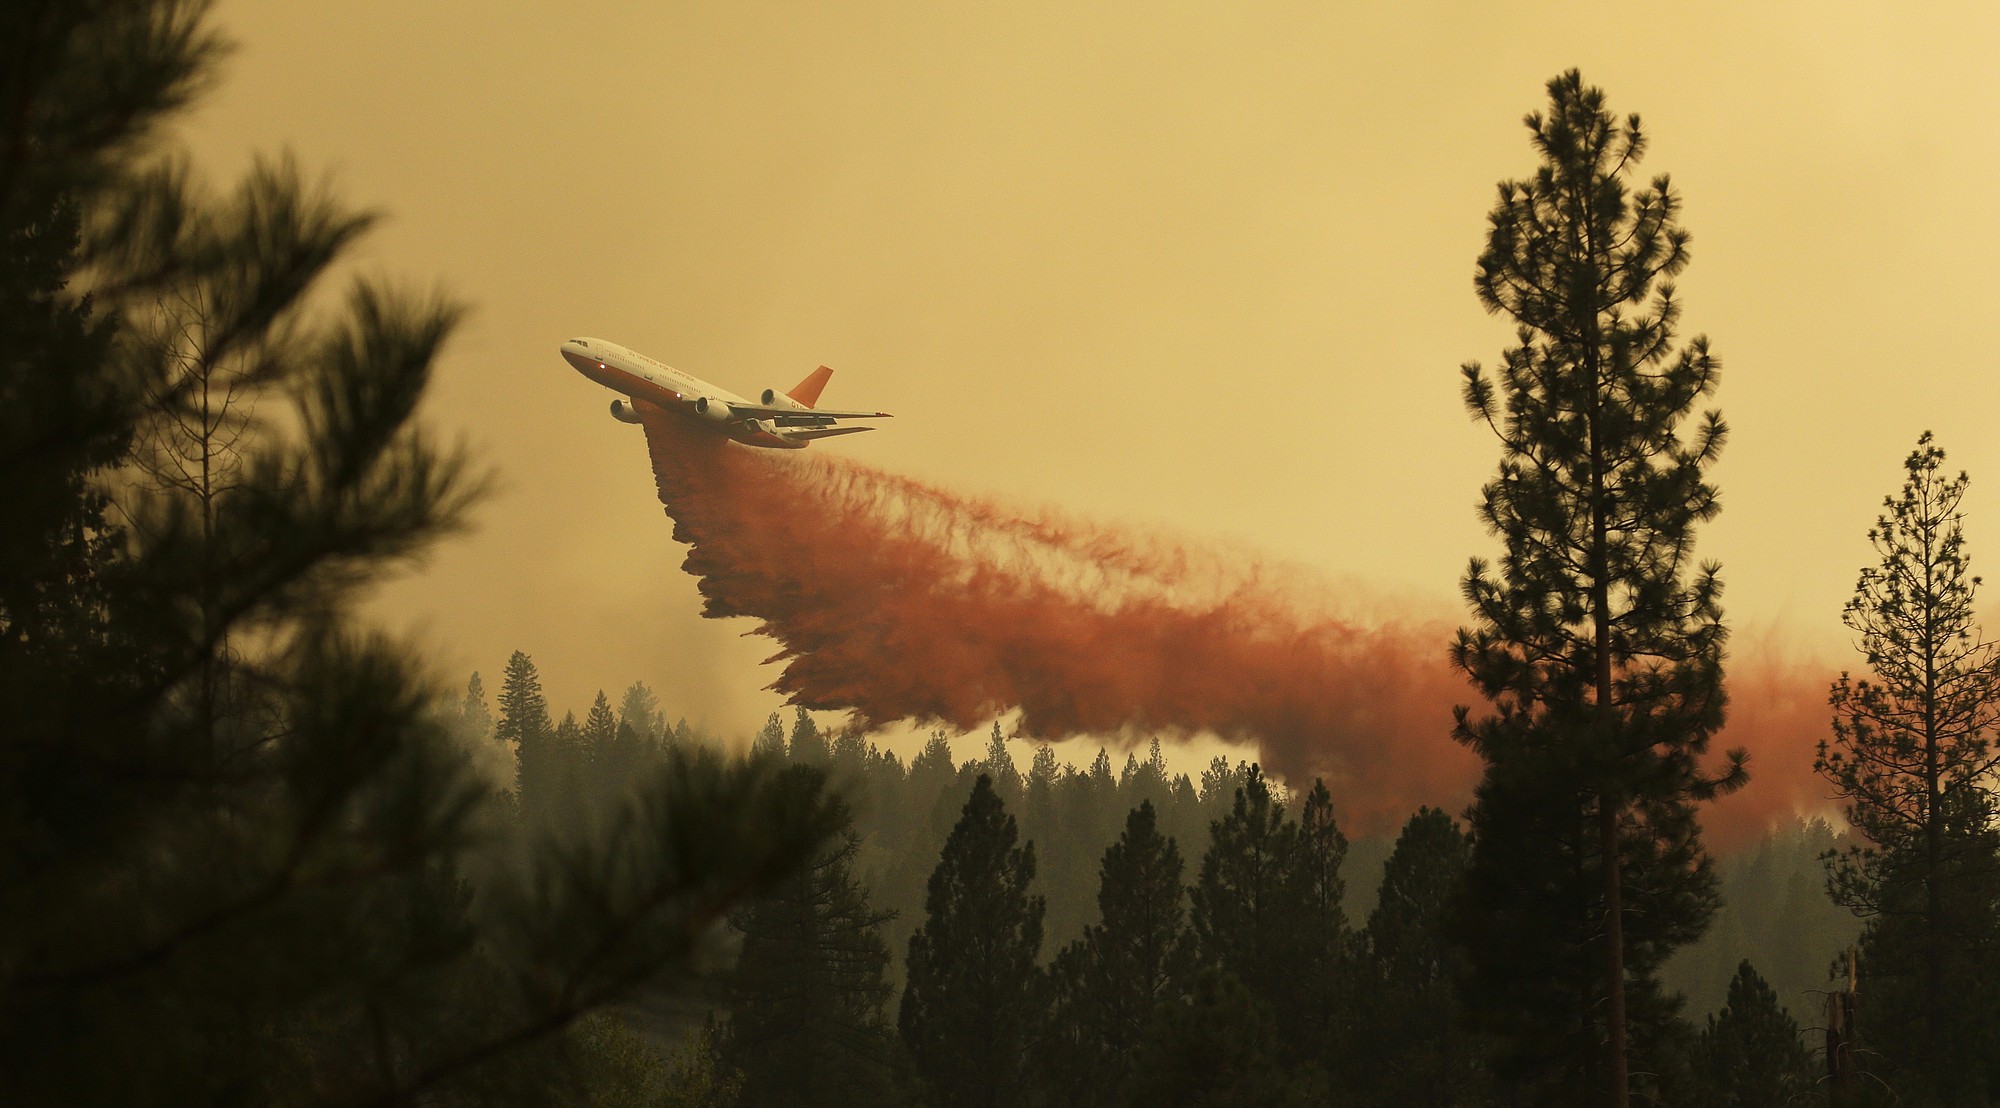 An airplane tanker flies through smoky air as it drops fire retardant on a wildfire that flared up in the late afternoon Thursday near Omak.